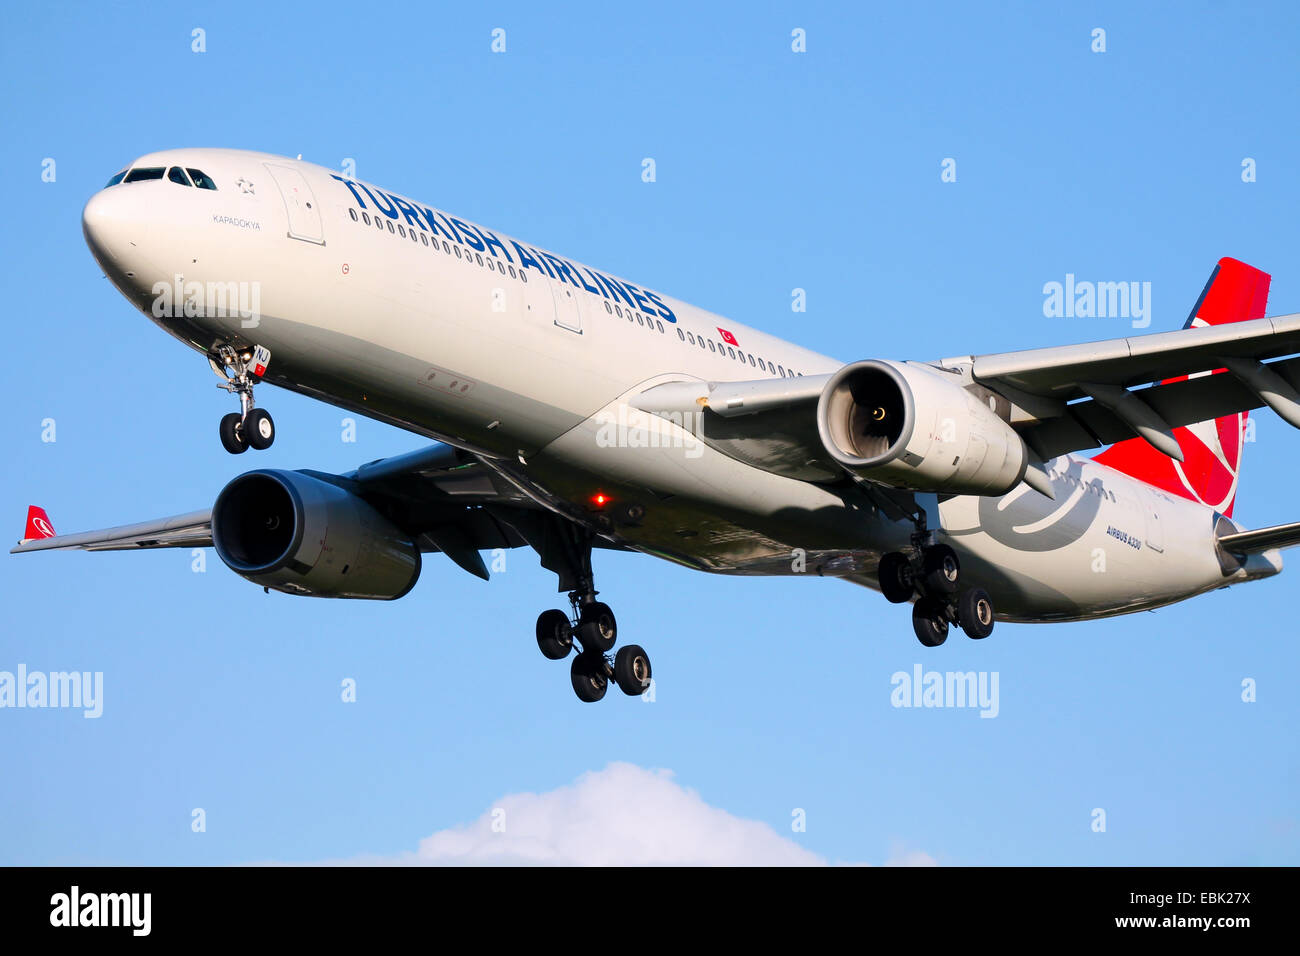 Turkish Airlines Airbus A330-300 approaches runway 27L at London Heathrow airport. Stock Photo